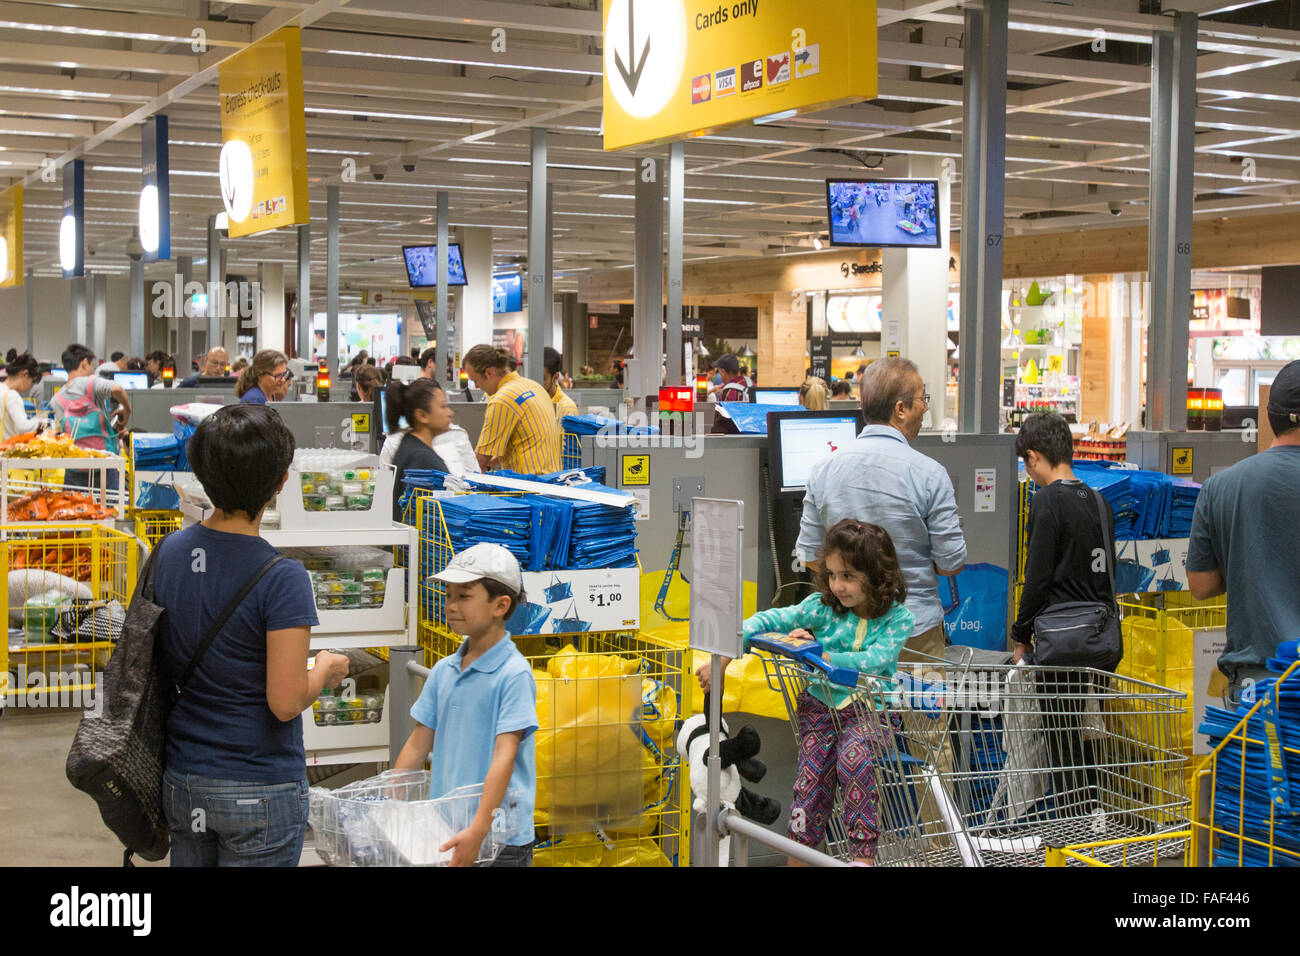 Express Checkout Till Ikea Furniture Store At Rhodes Shopping